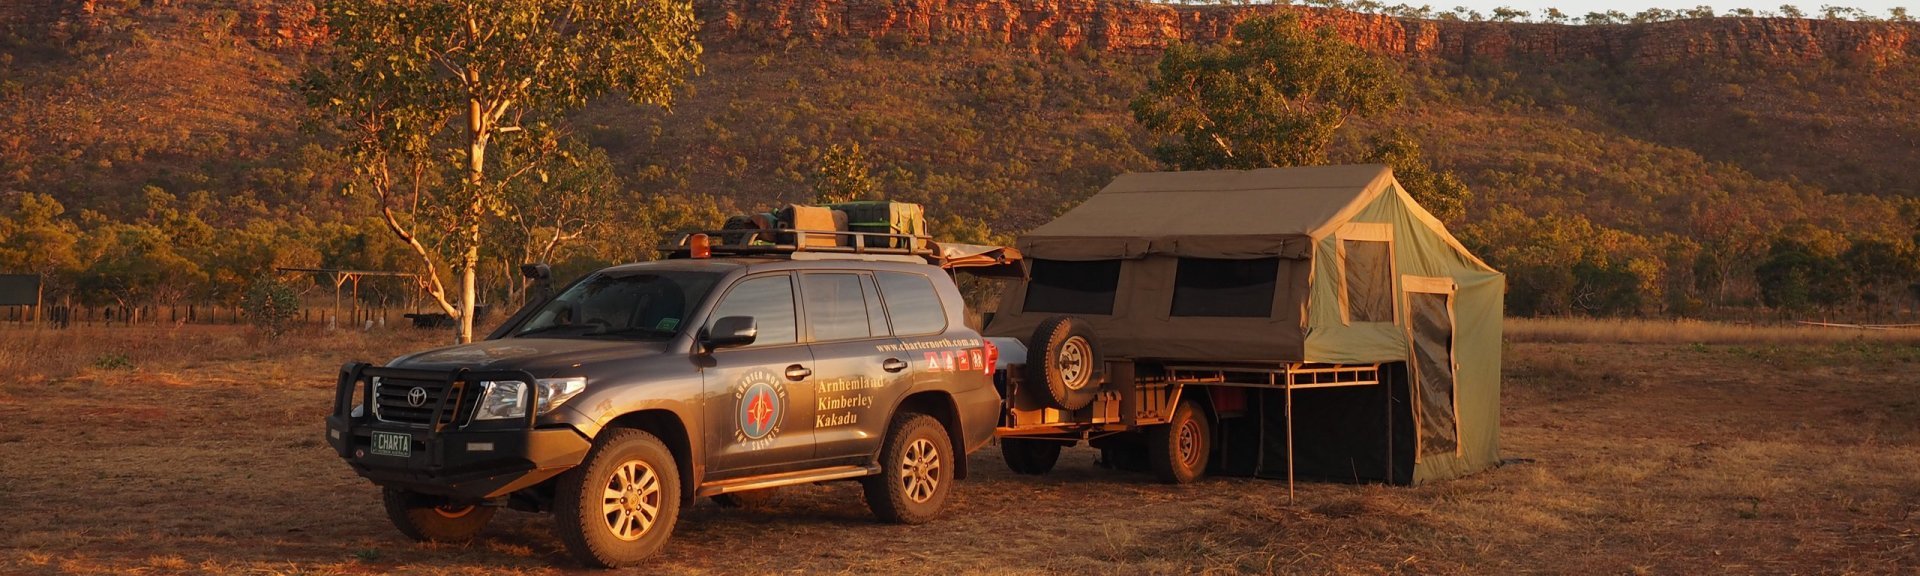 The spacious, comfortable camper trailer. Photo: Charter North 4WD Safaris